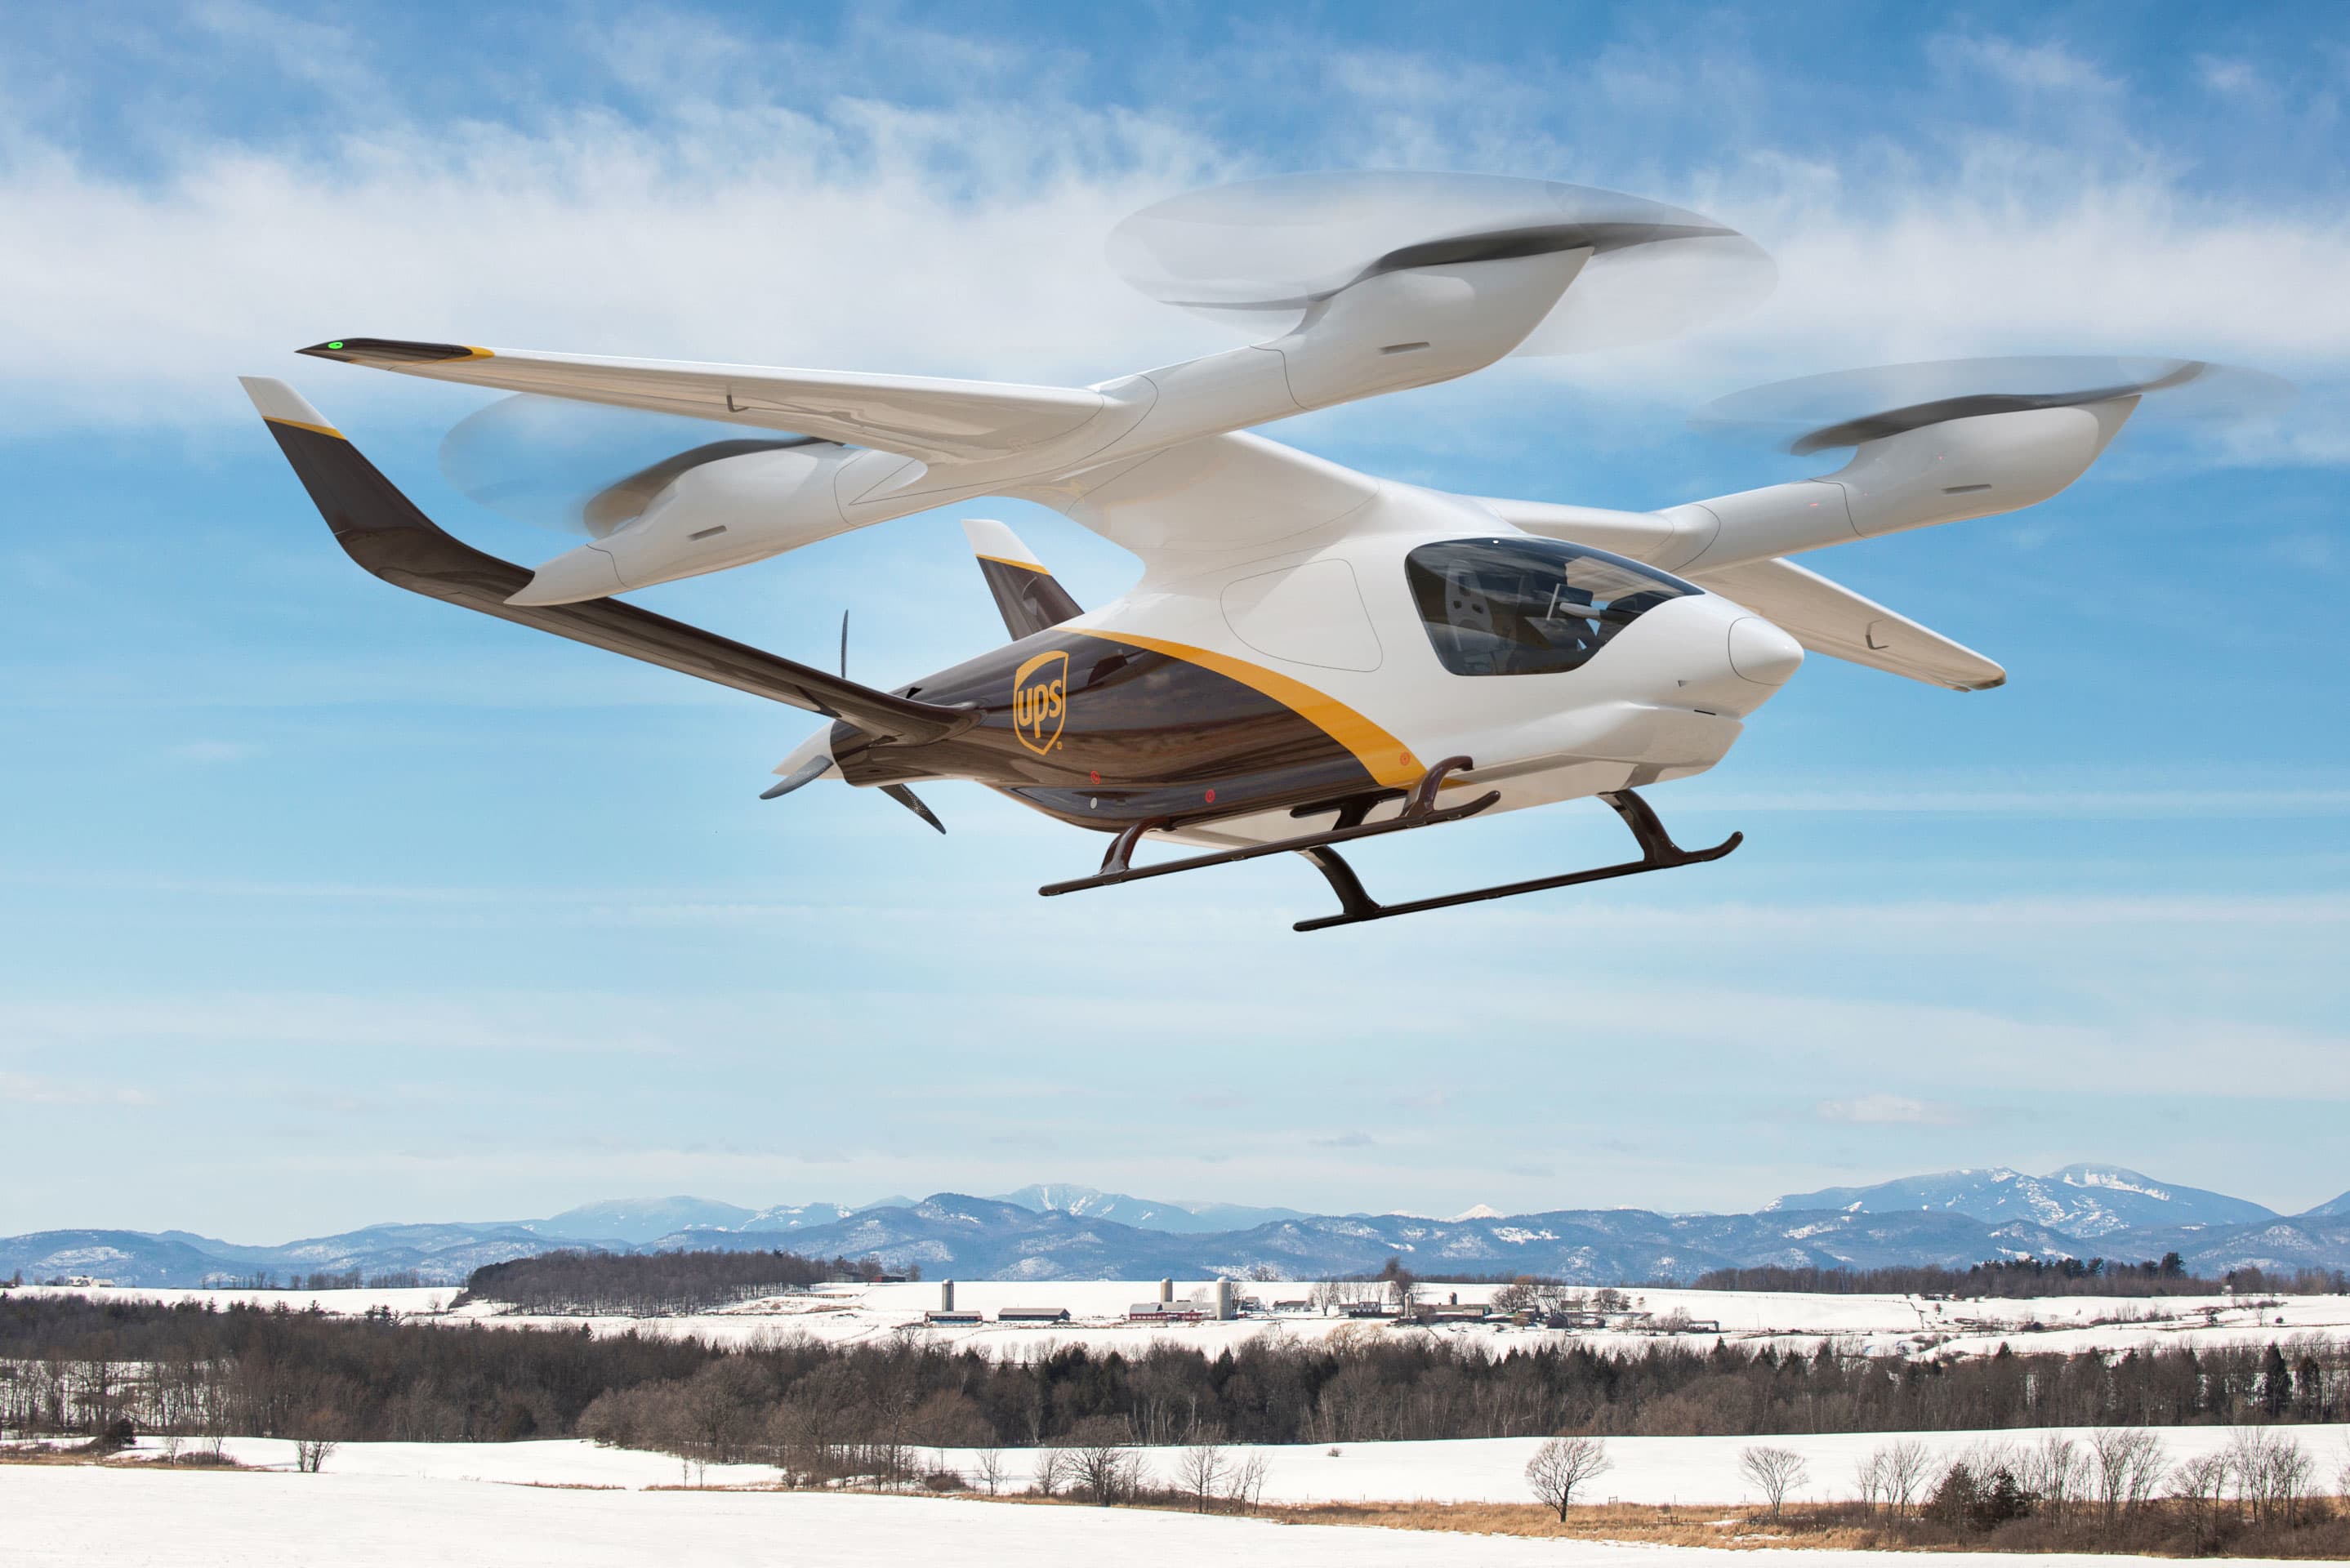 UPS will buy eVTOL aircraft to accelerate the delivery of packages to small markets